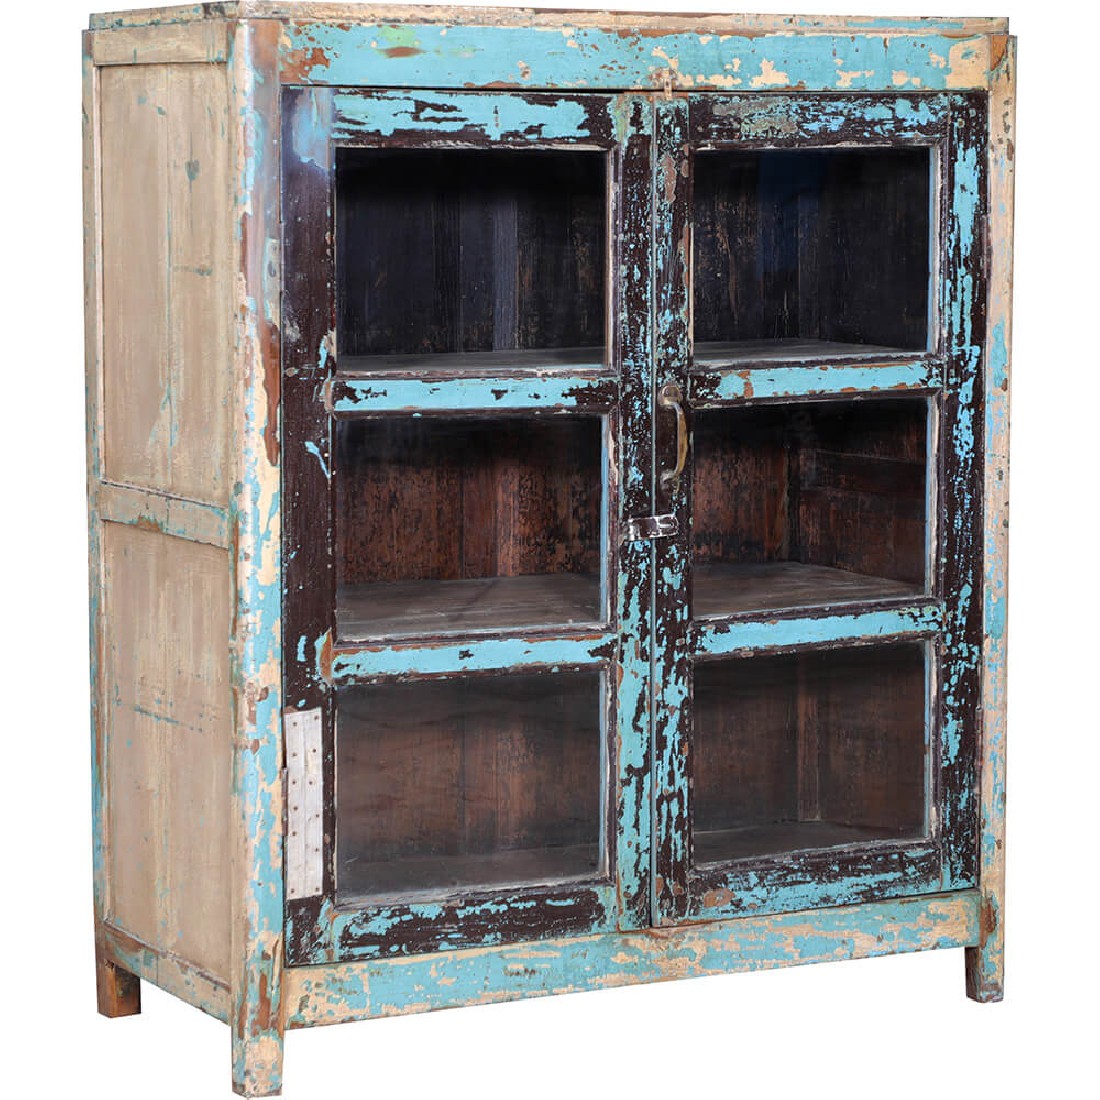 Trademark Display cabinet with raw patina3dhaus.gr